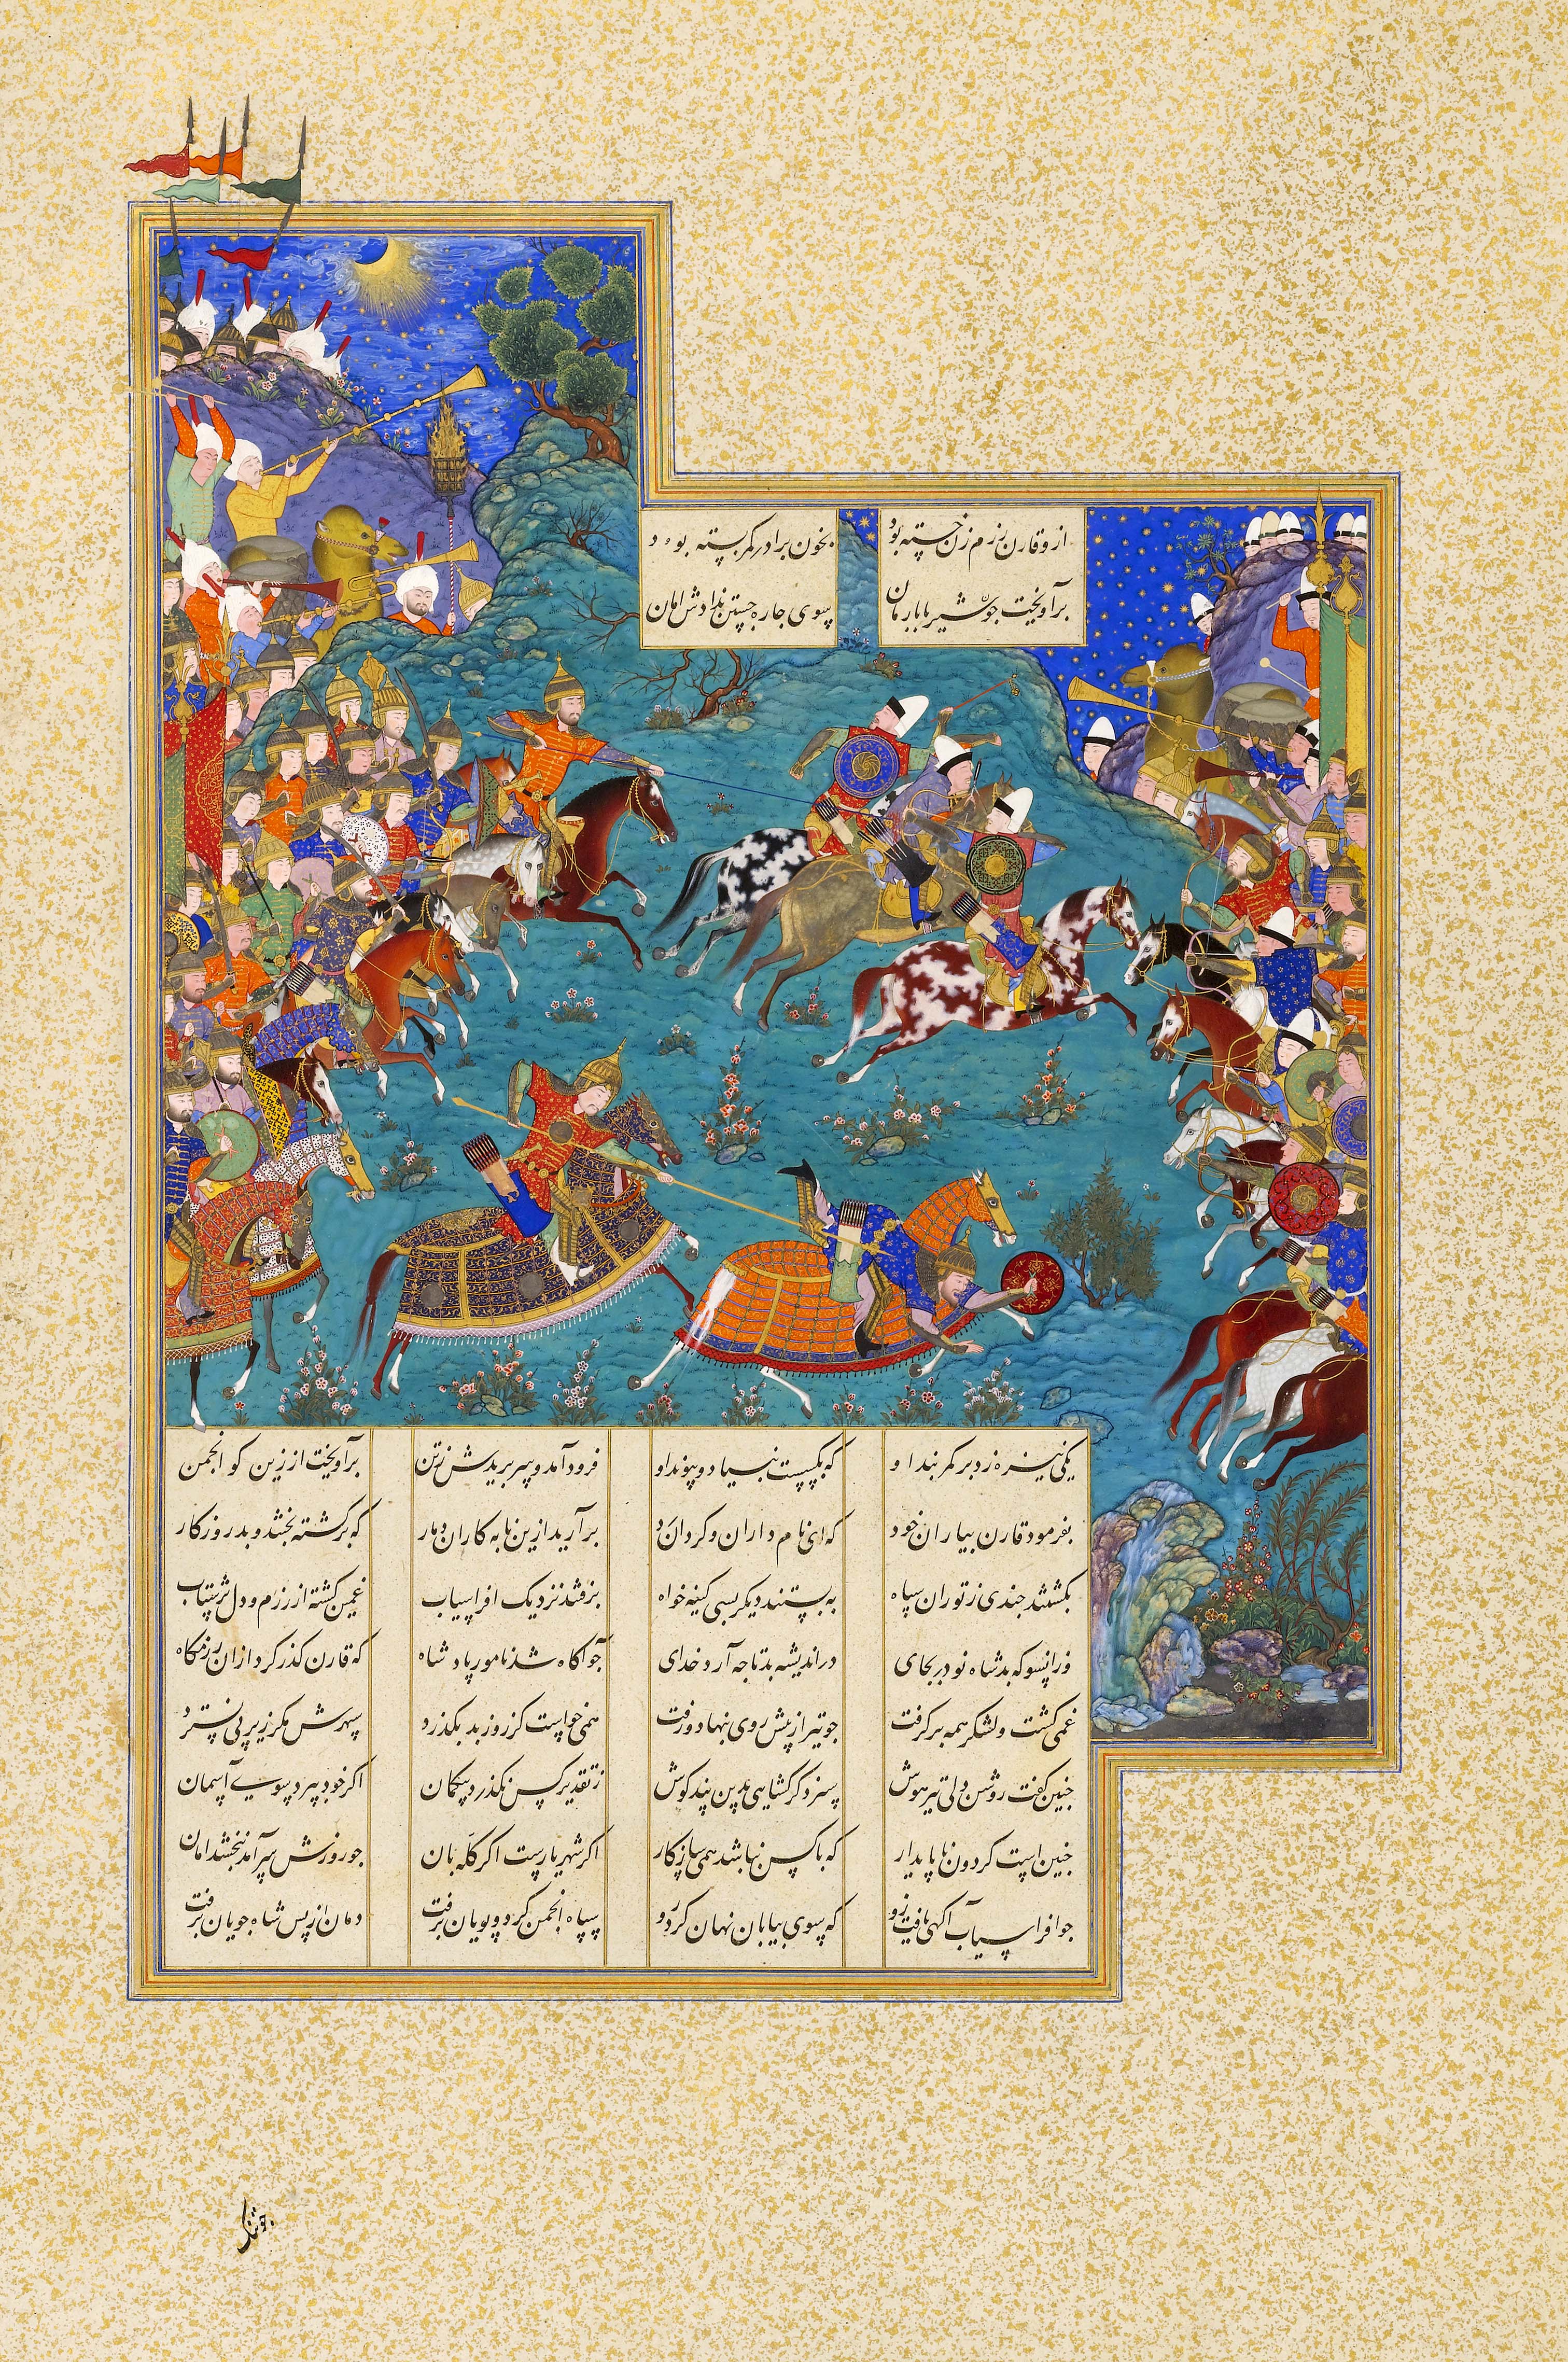 Detached-folio-from-an-illuminated-manuscript-of-the-Shahnameh-for-Shah-Tahmasp.-The-Sarikhani-Collection